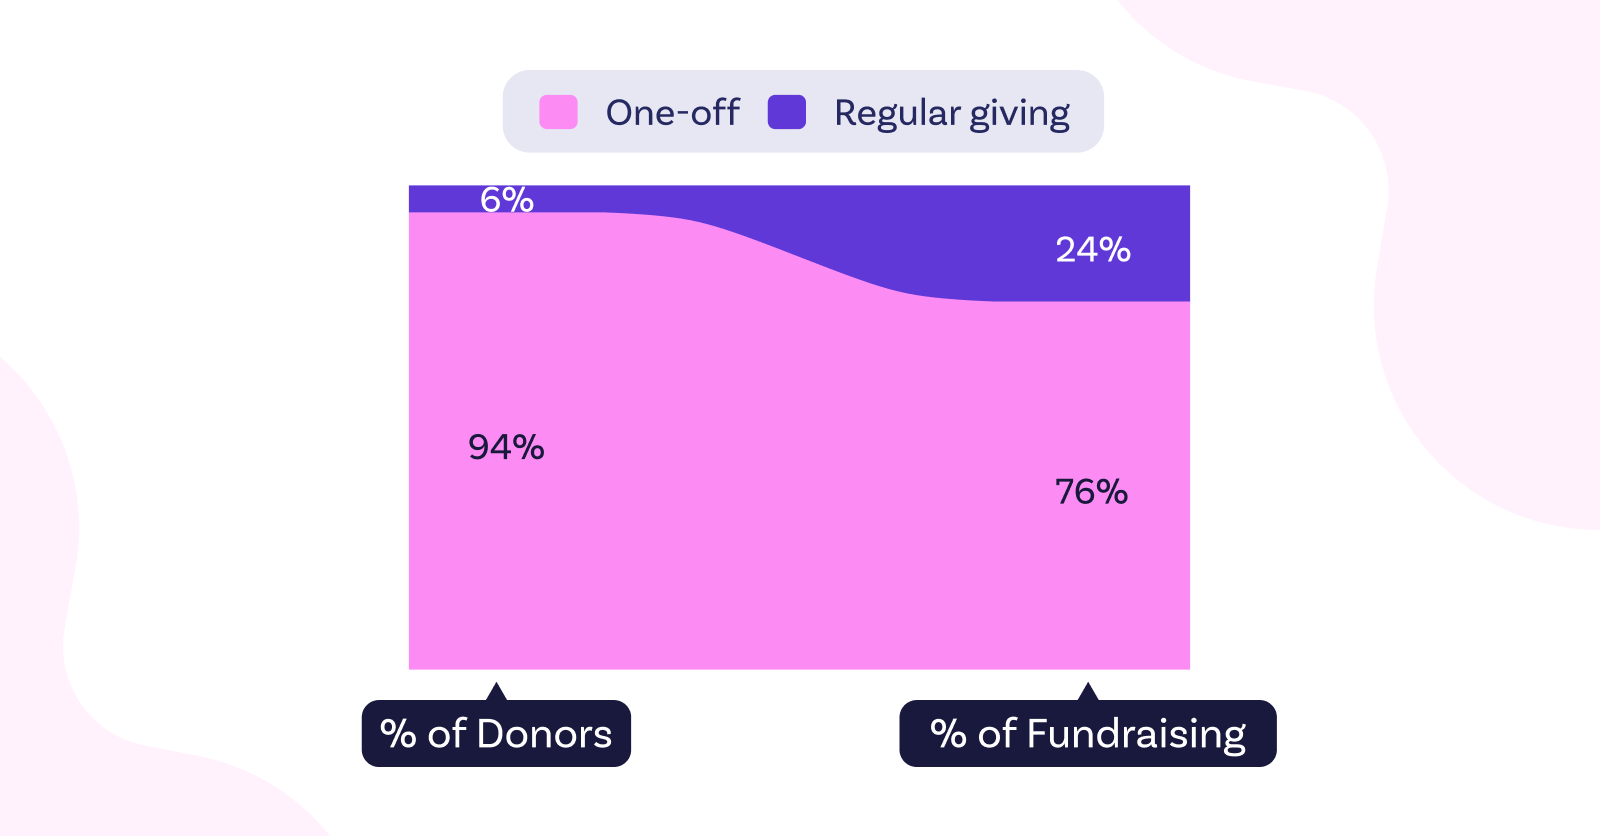 The Power of Regular Giving: Insights from our data